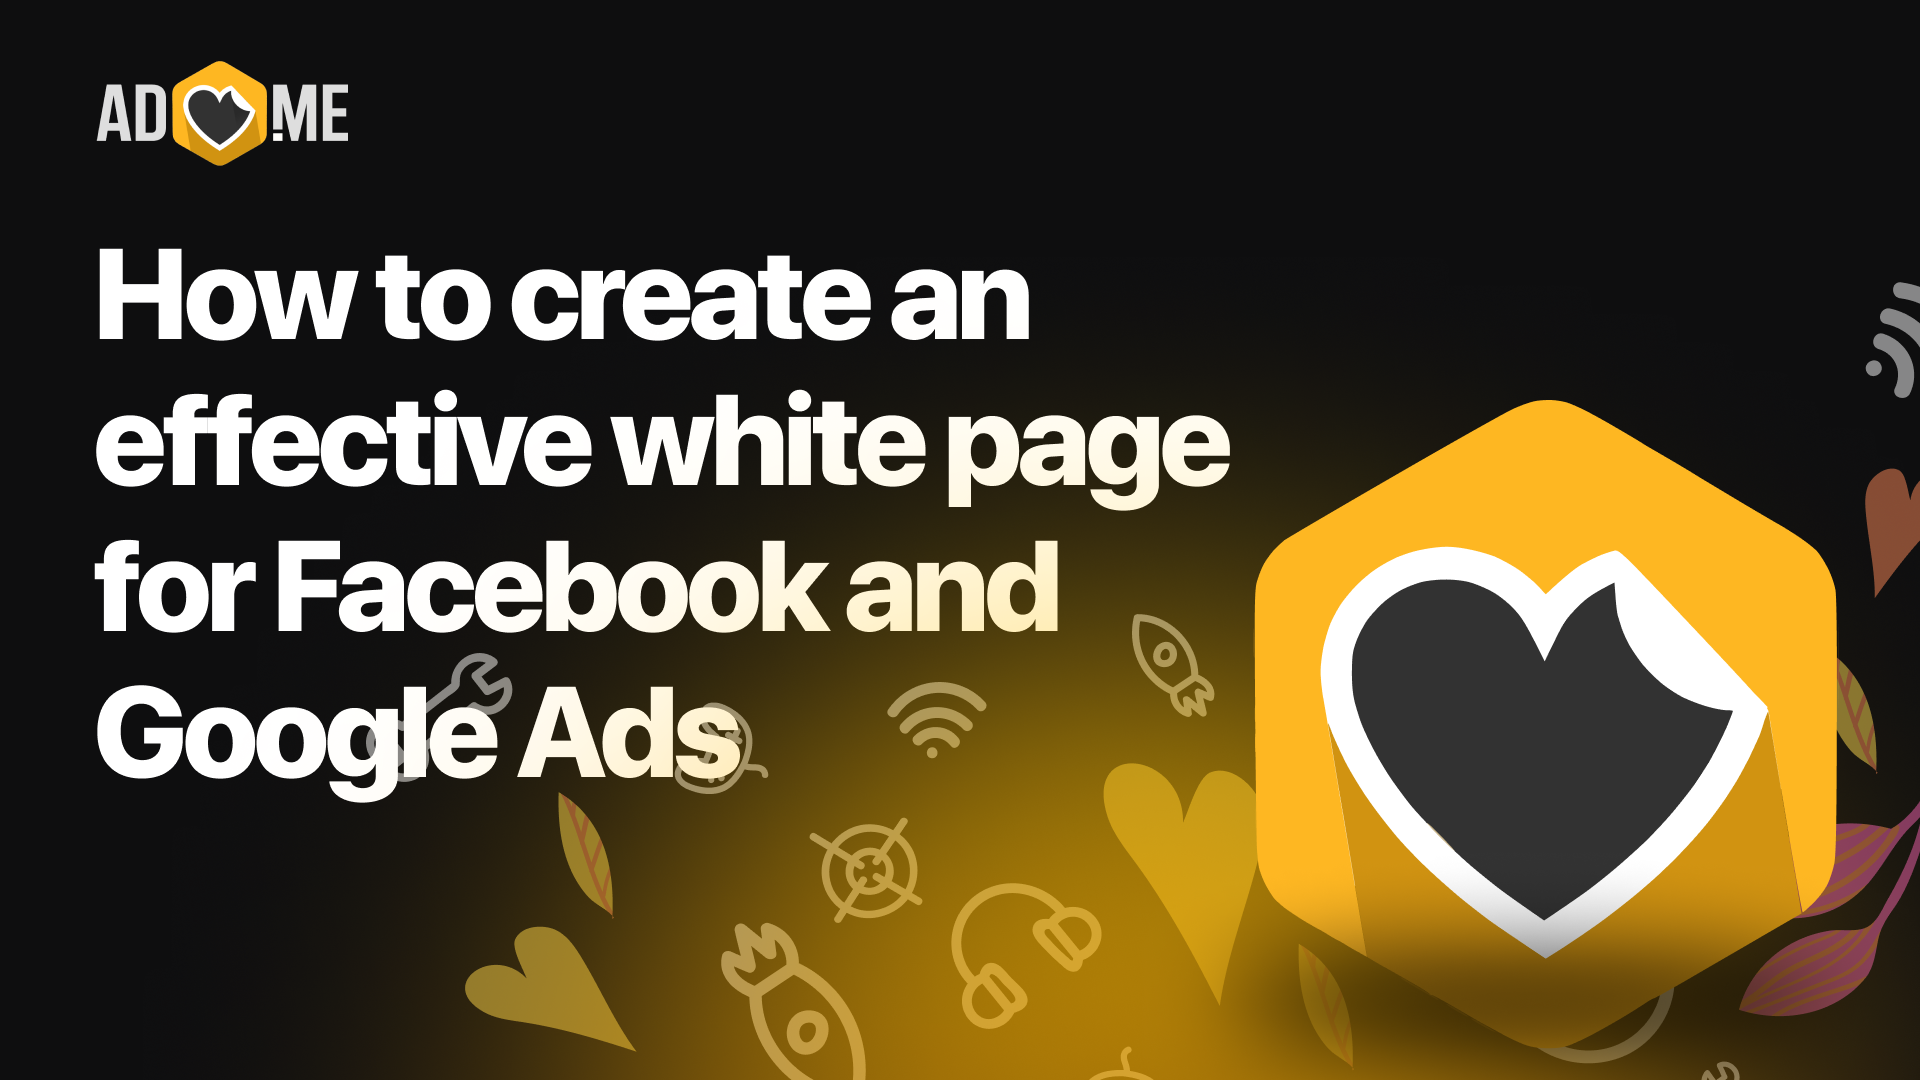 Guide to creating an effective white page for advertising on Facebook and Google Ads